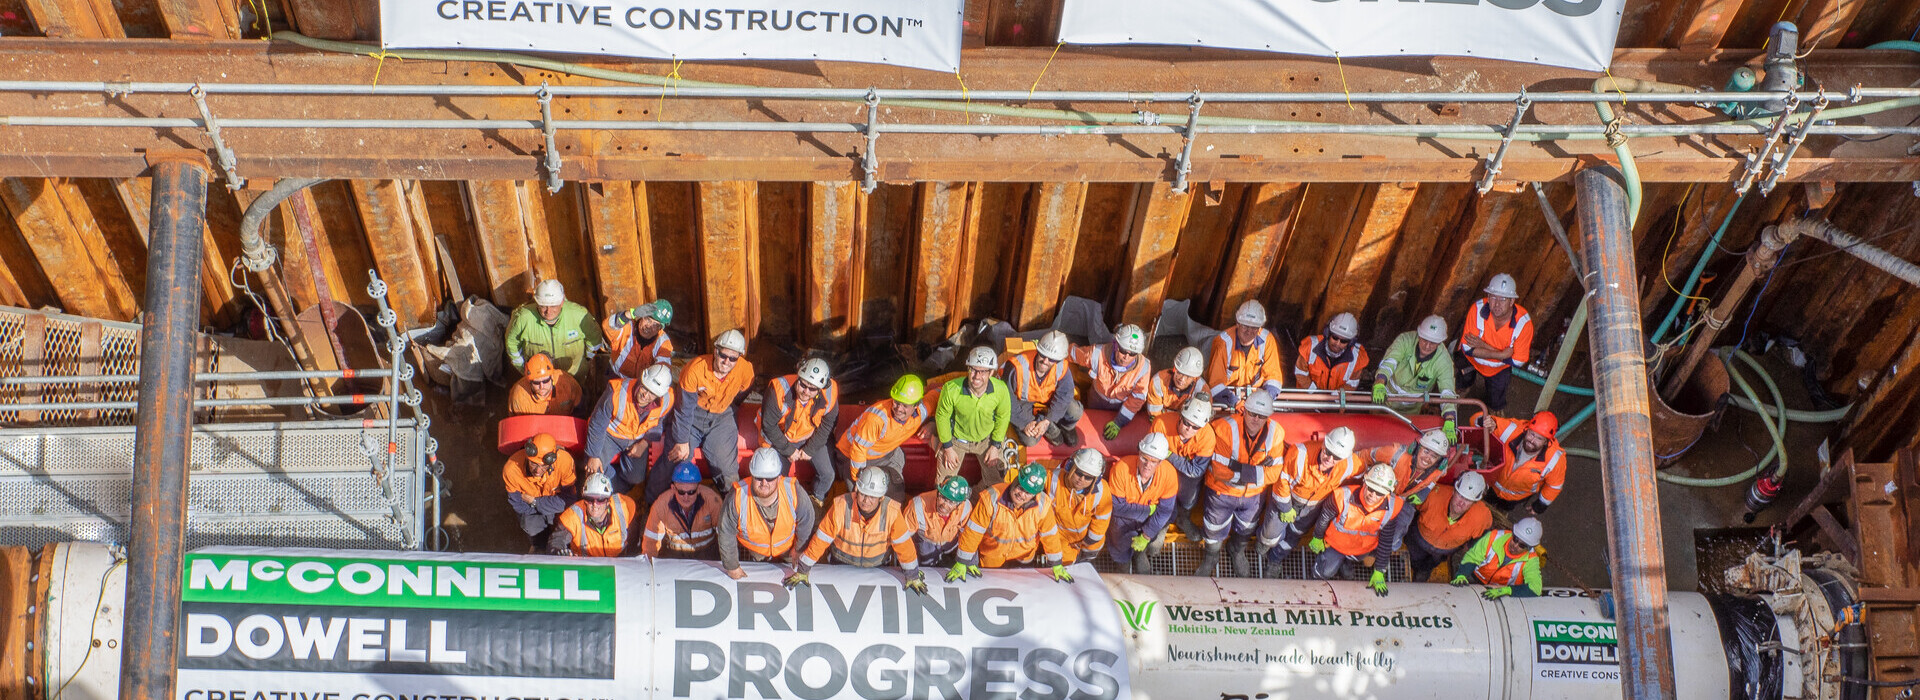 'Piper' completes tunnelling on the Westland Milk Outfall Project